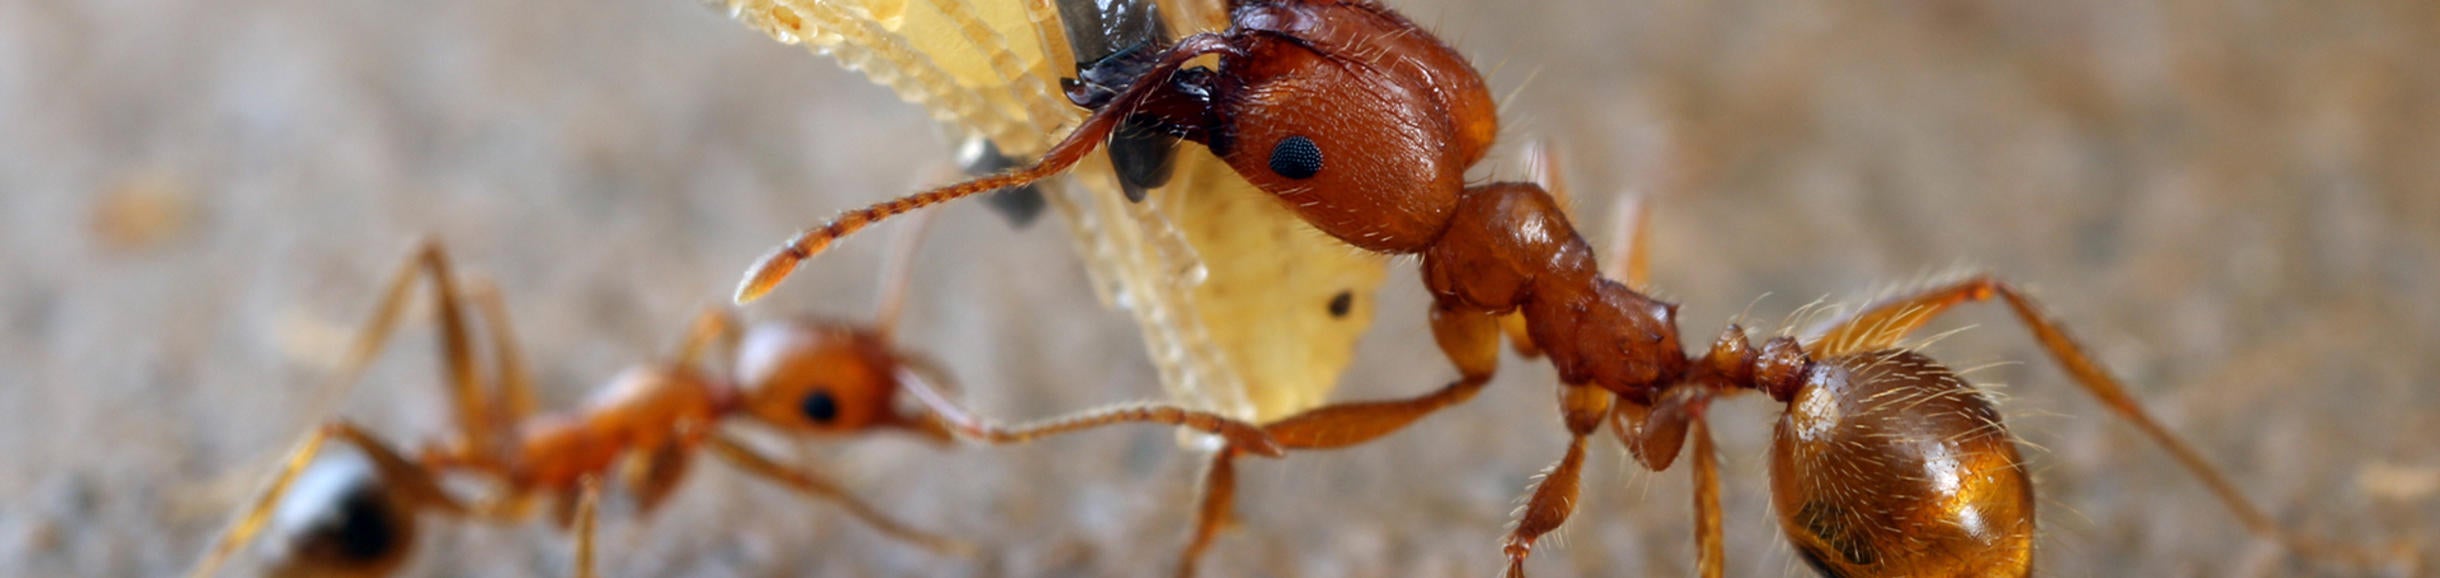 Pheidole ant carrying a pupa